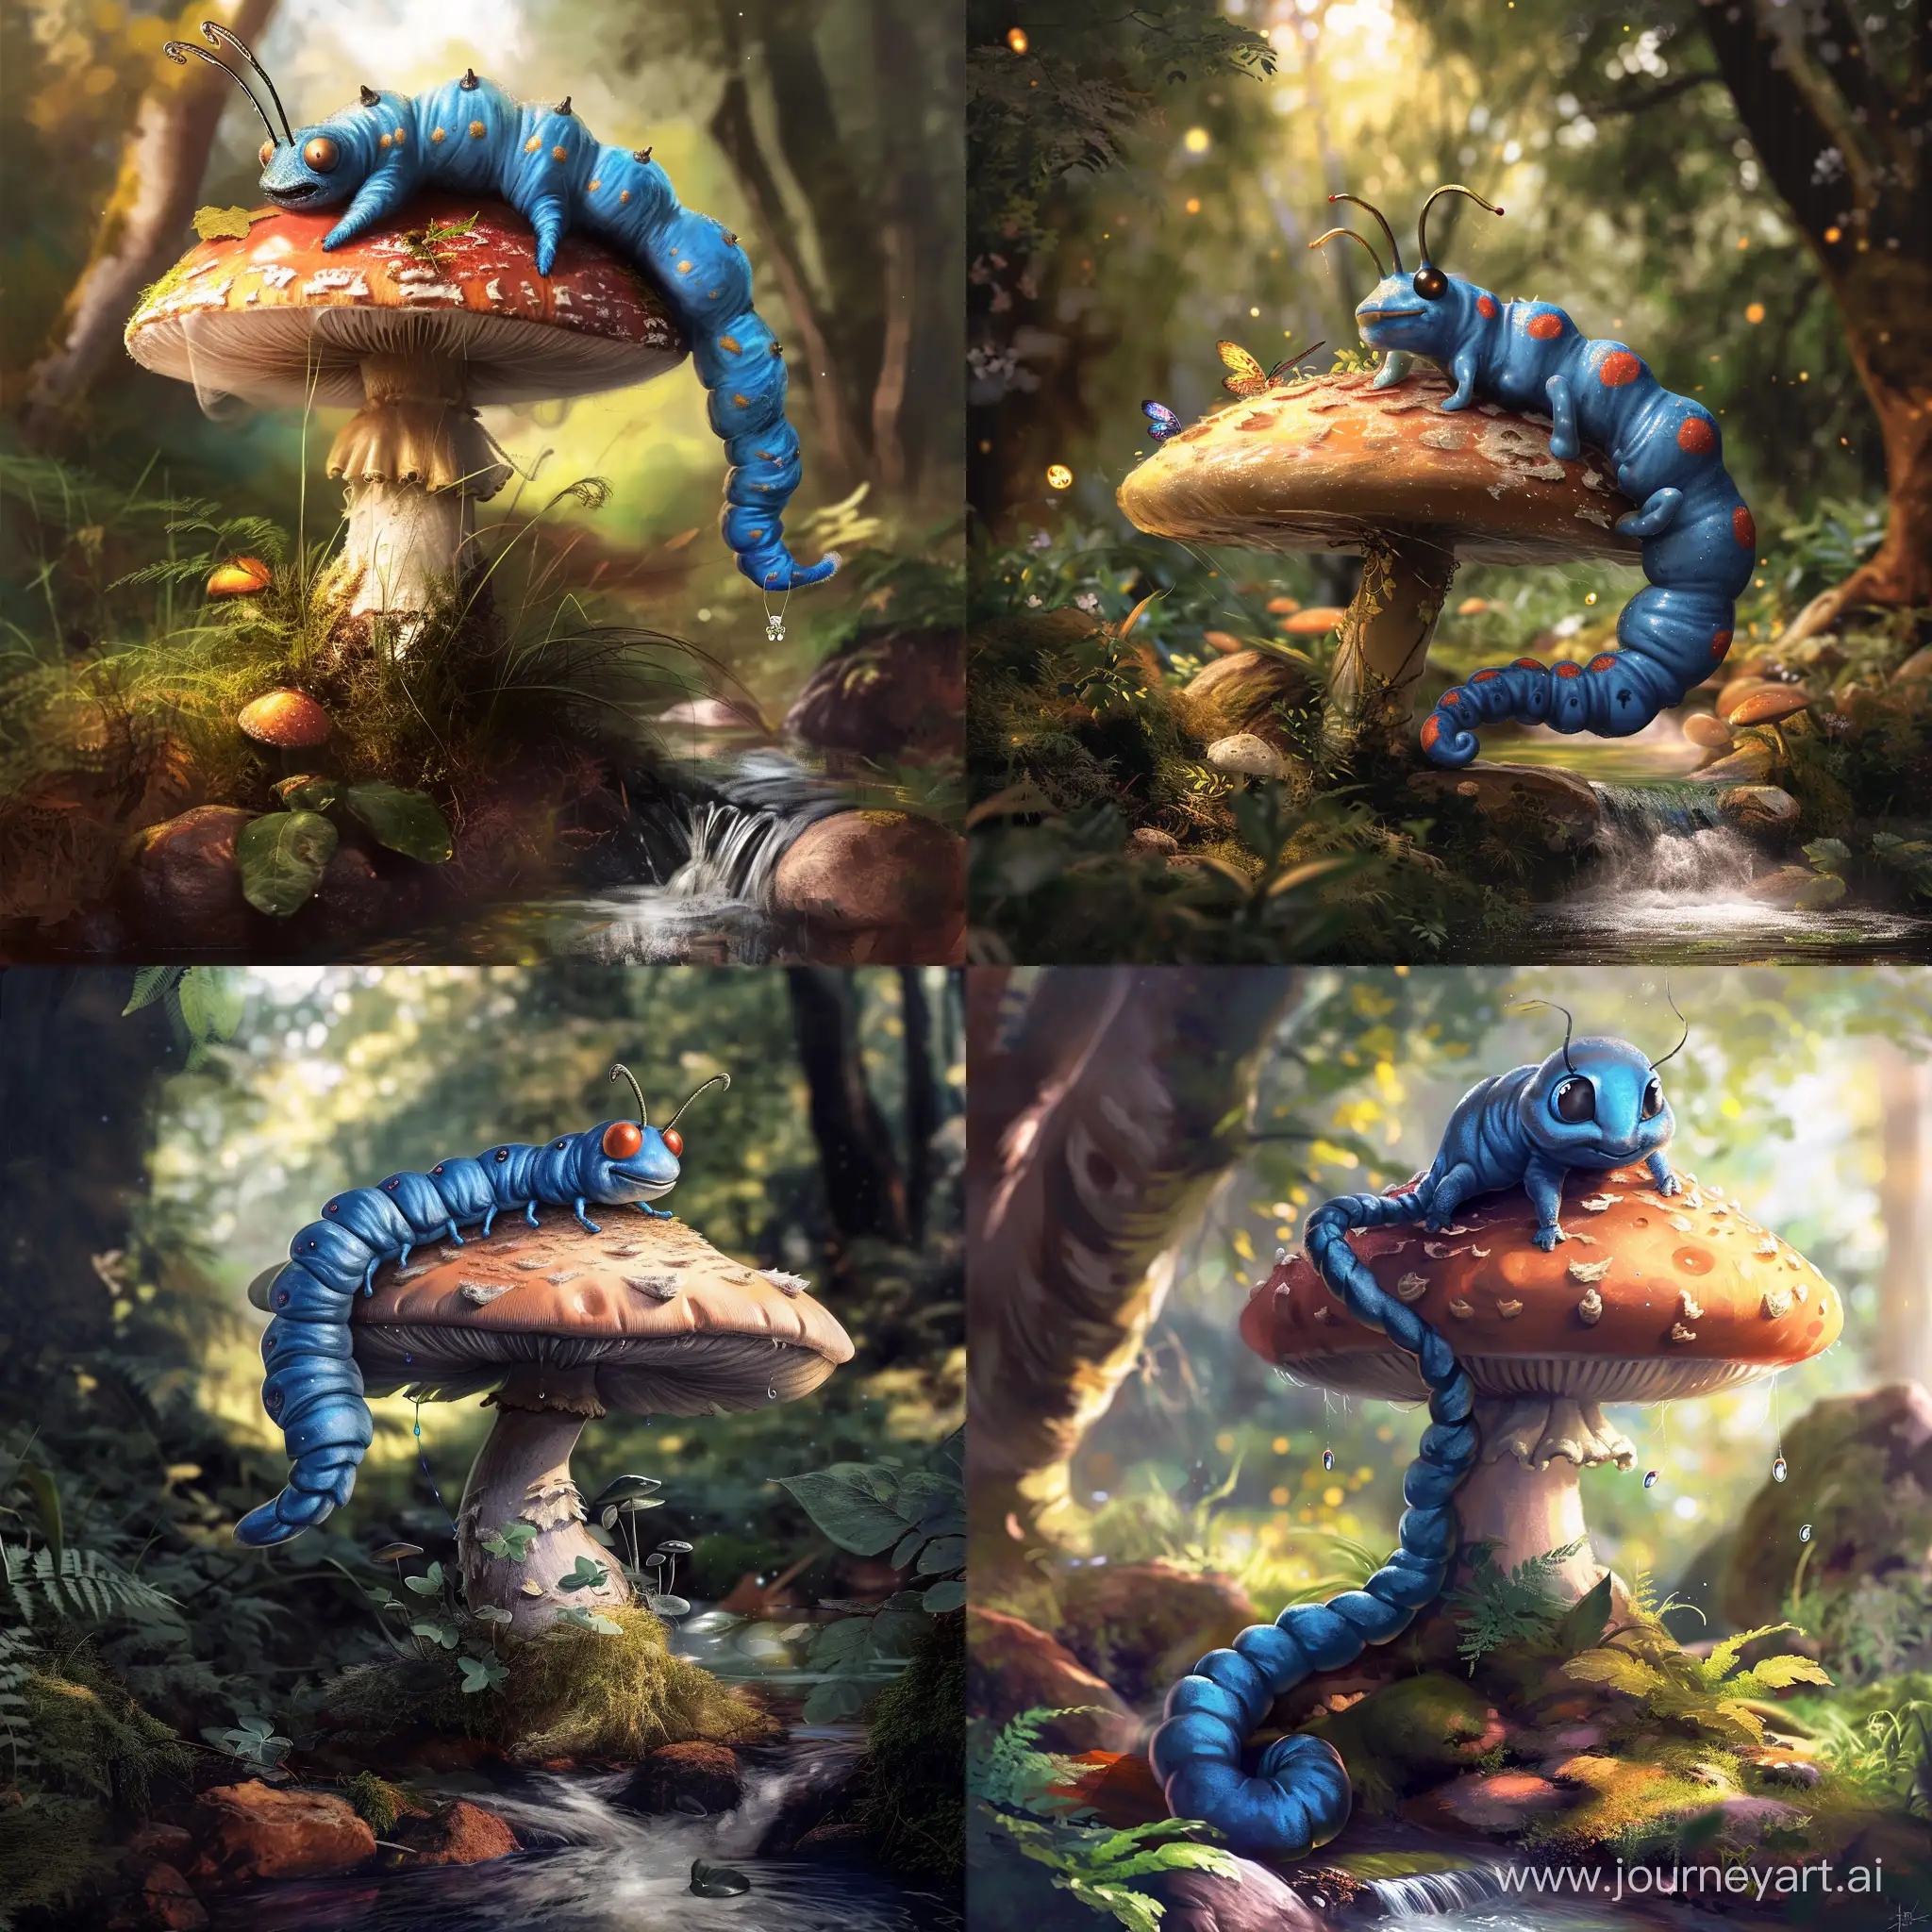 Blue-Caterpillar-on-Magical-Mushroom-Journey-of-Acceptance-Resolution-and-Love